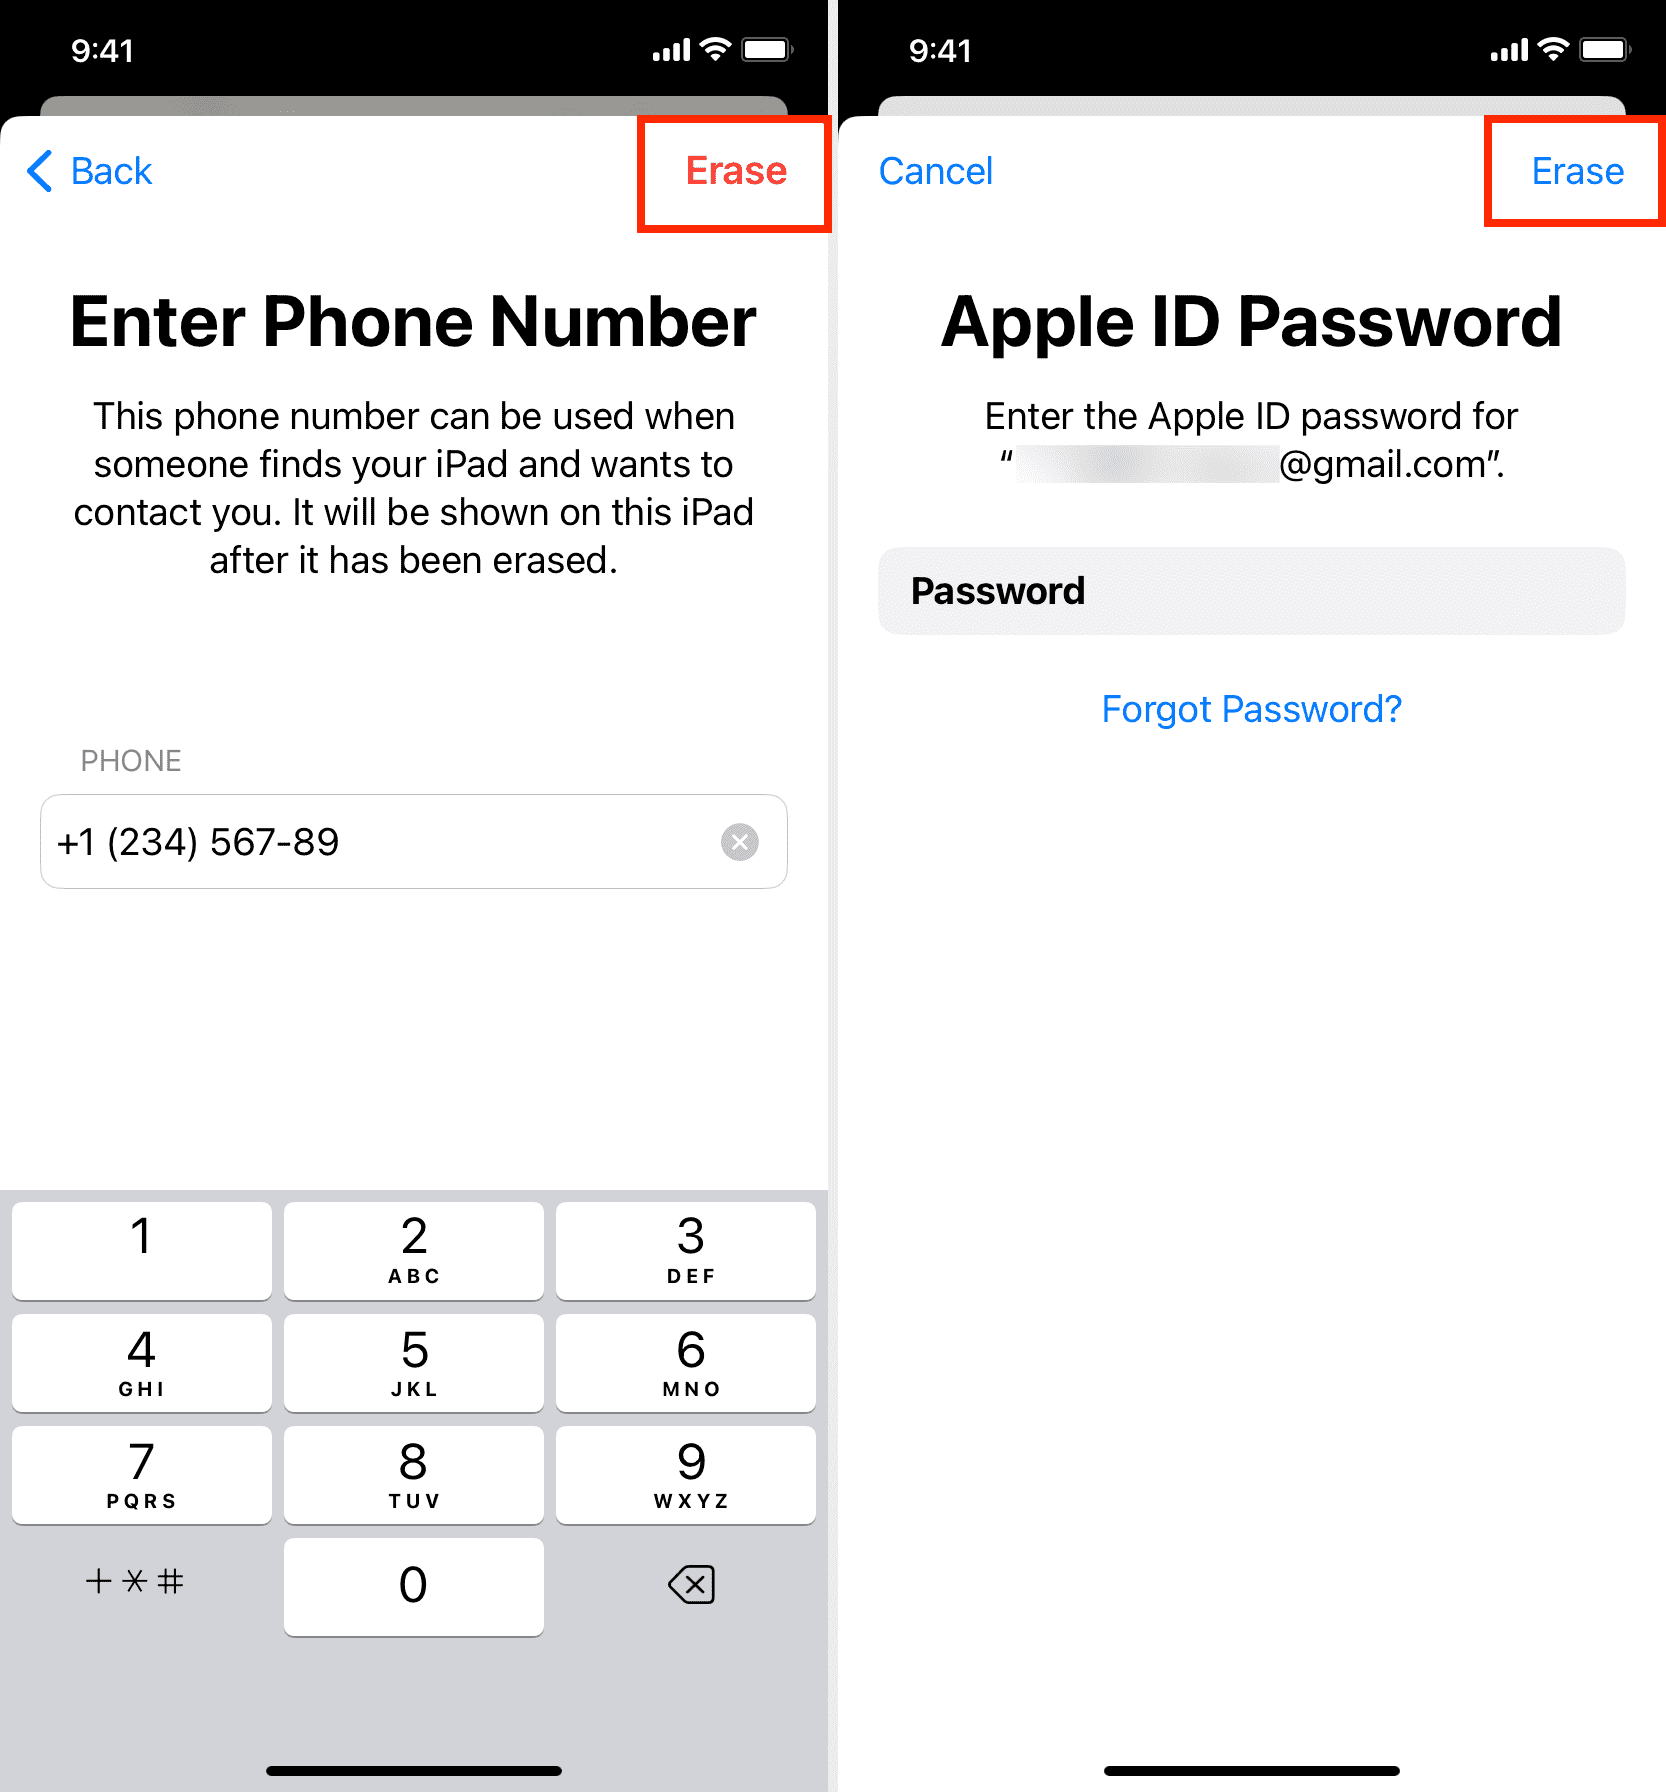 Enter phone number and apple id password before erasing lost iPhone remotely